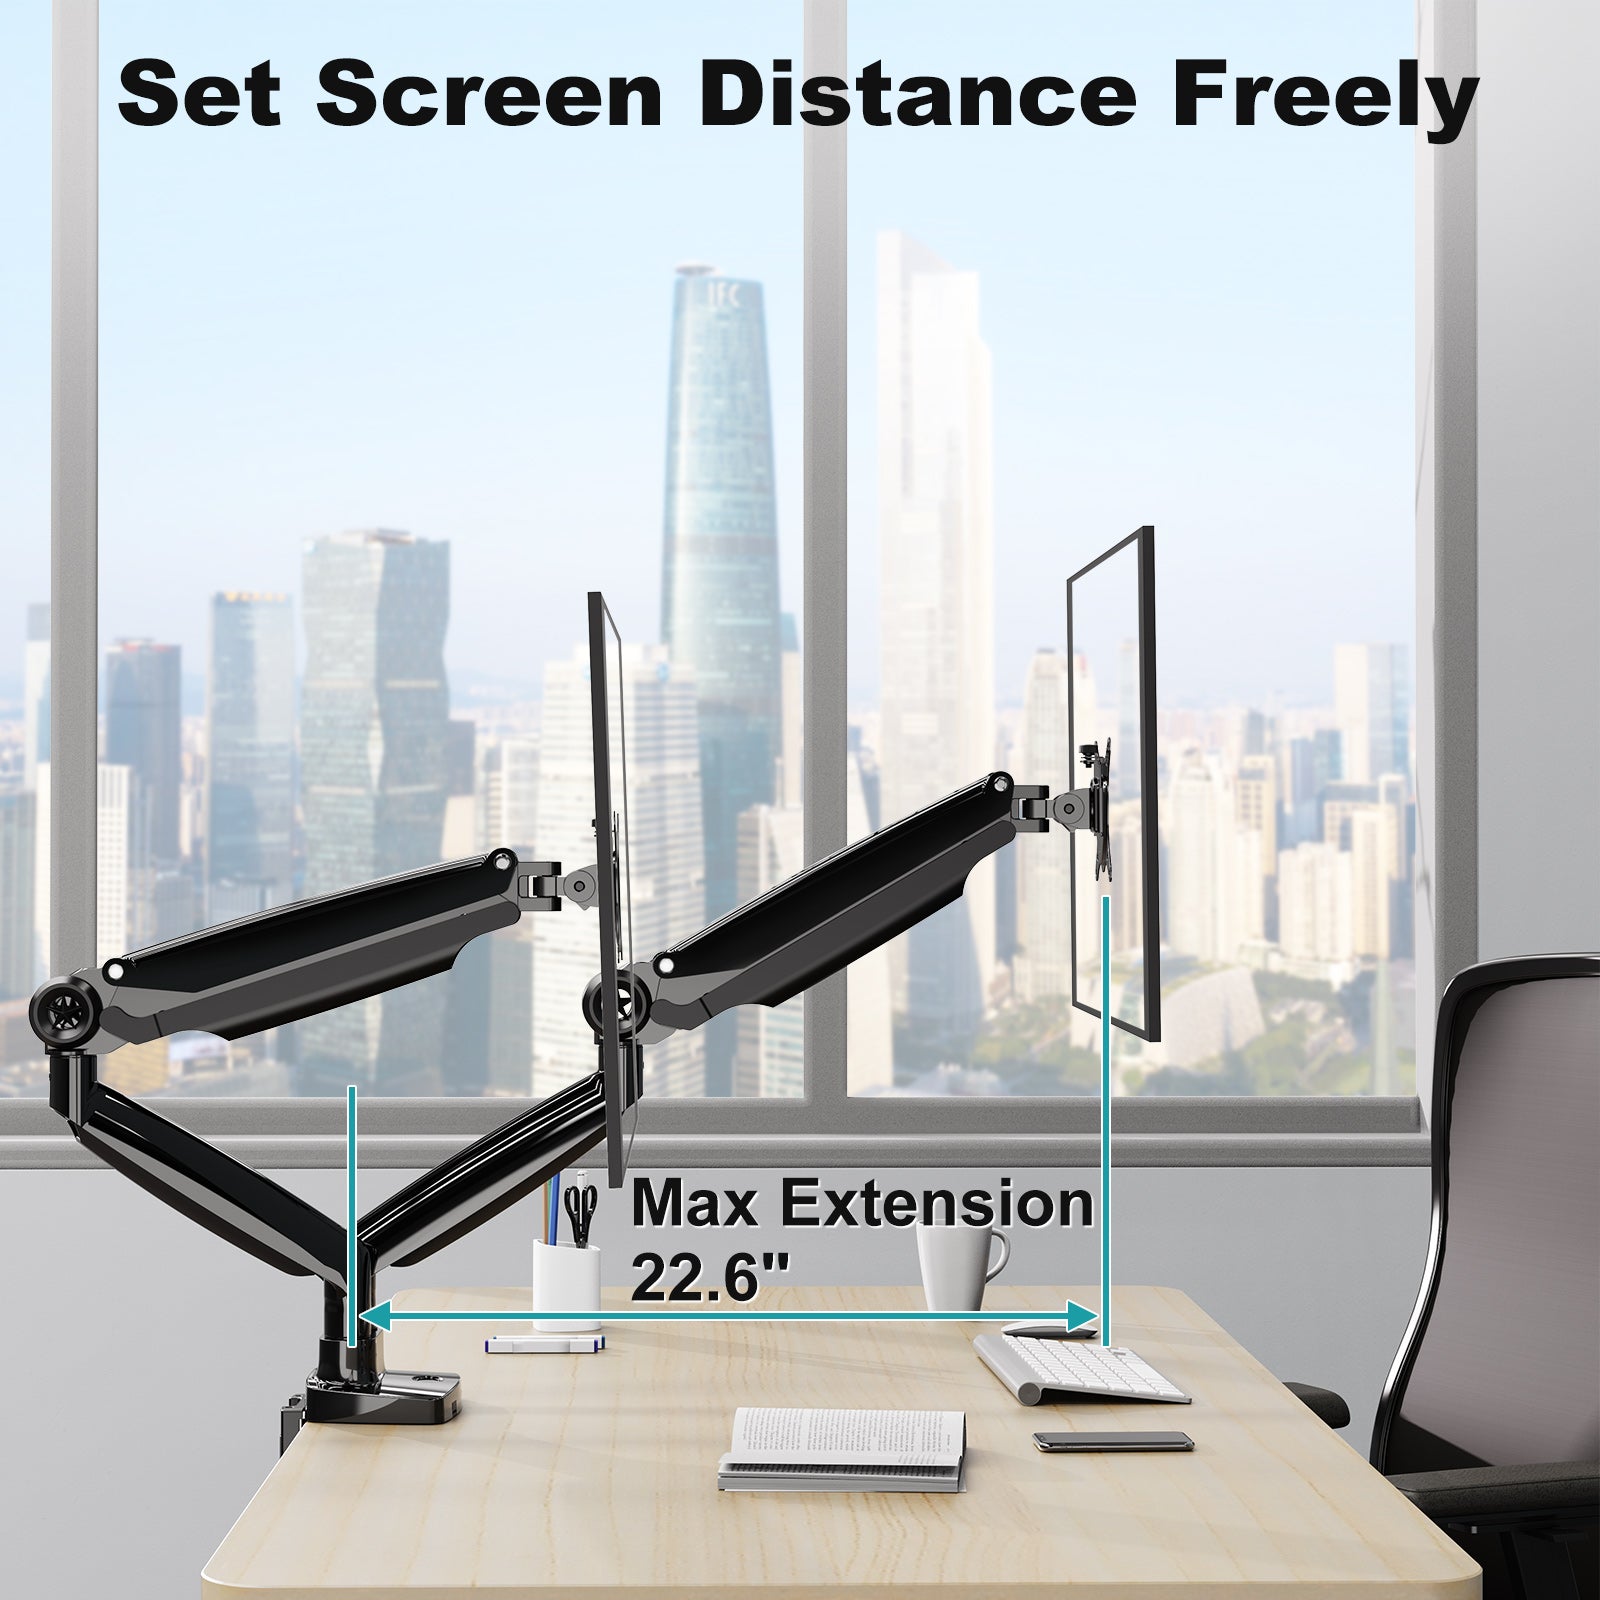 MOUNTUP UltraWide Dual Monitor Arm for Max 35 inch Screen, Support Up to 26.4lbs Heavy Duty Monitor Desk Mount, Black(MU7002)